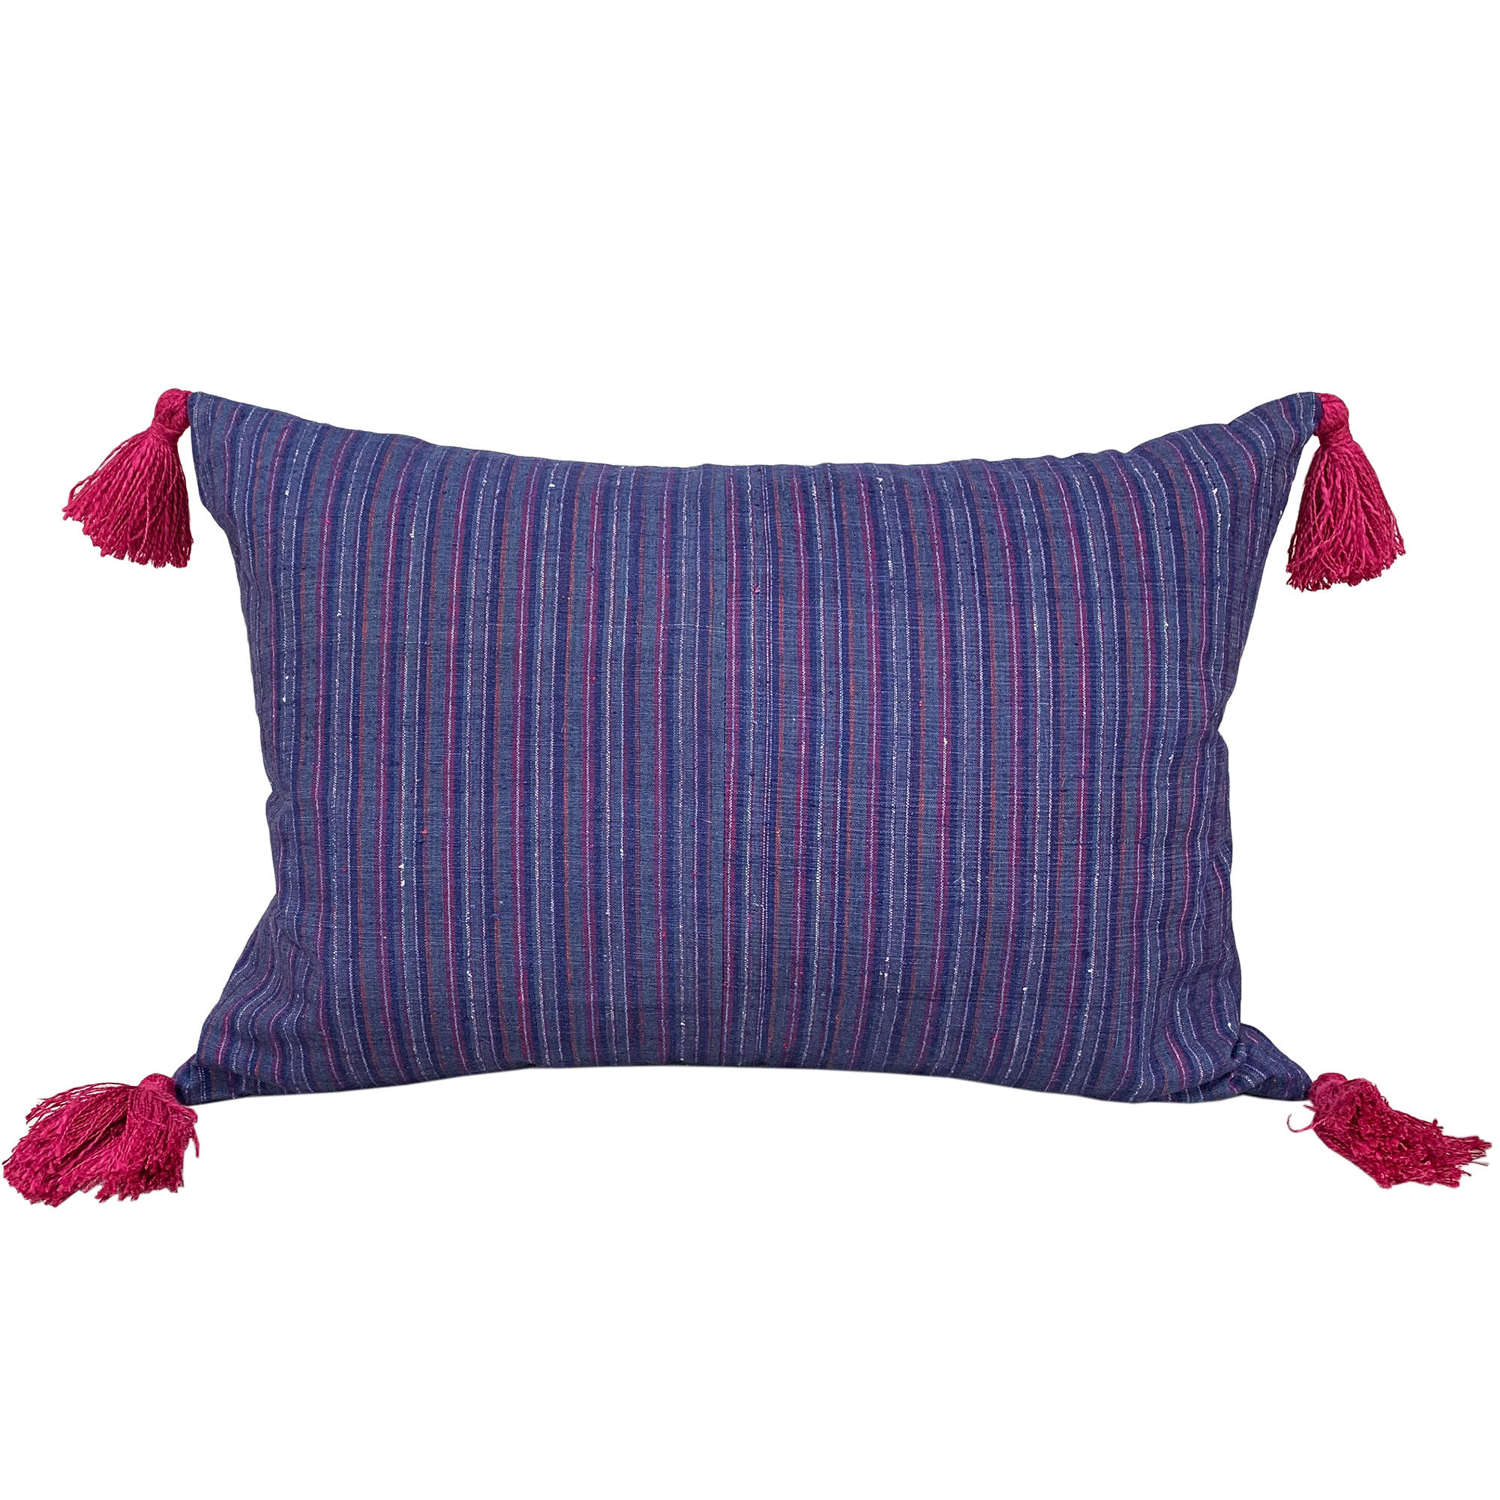 Songjiang cushions With Pink Tassels